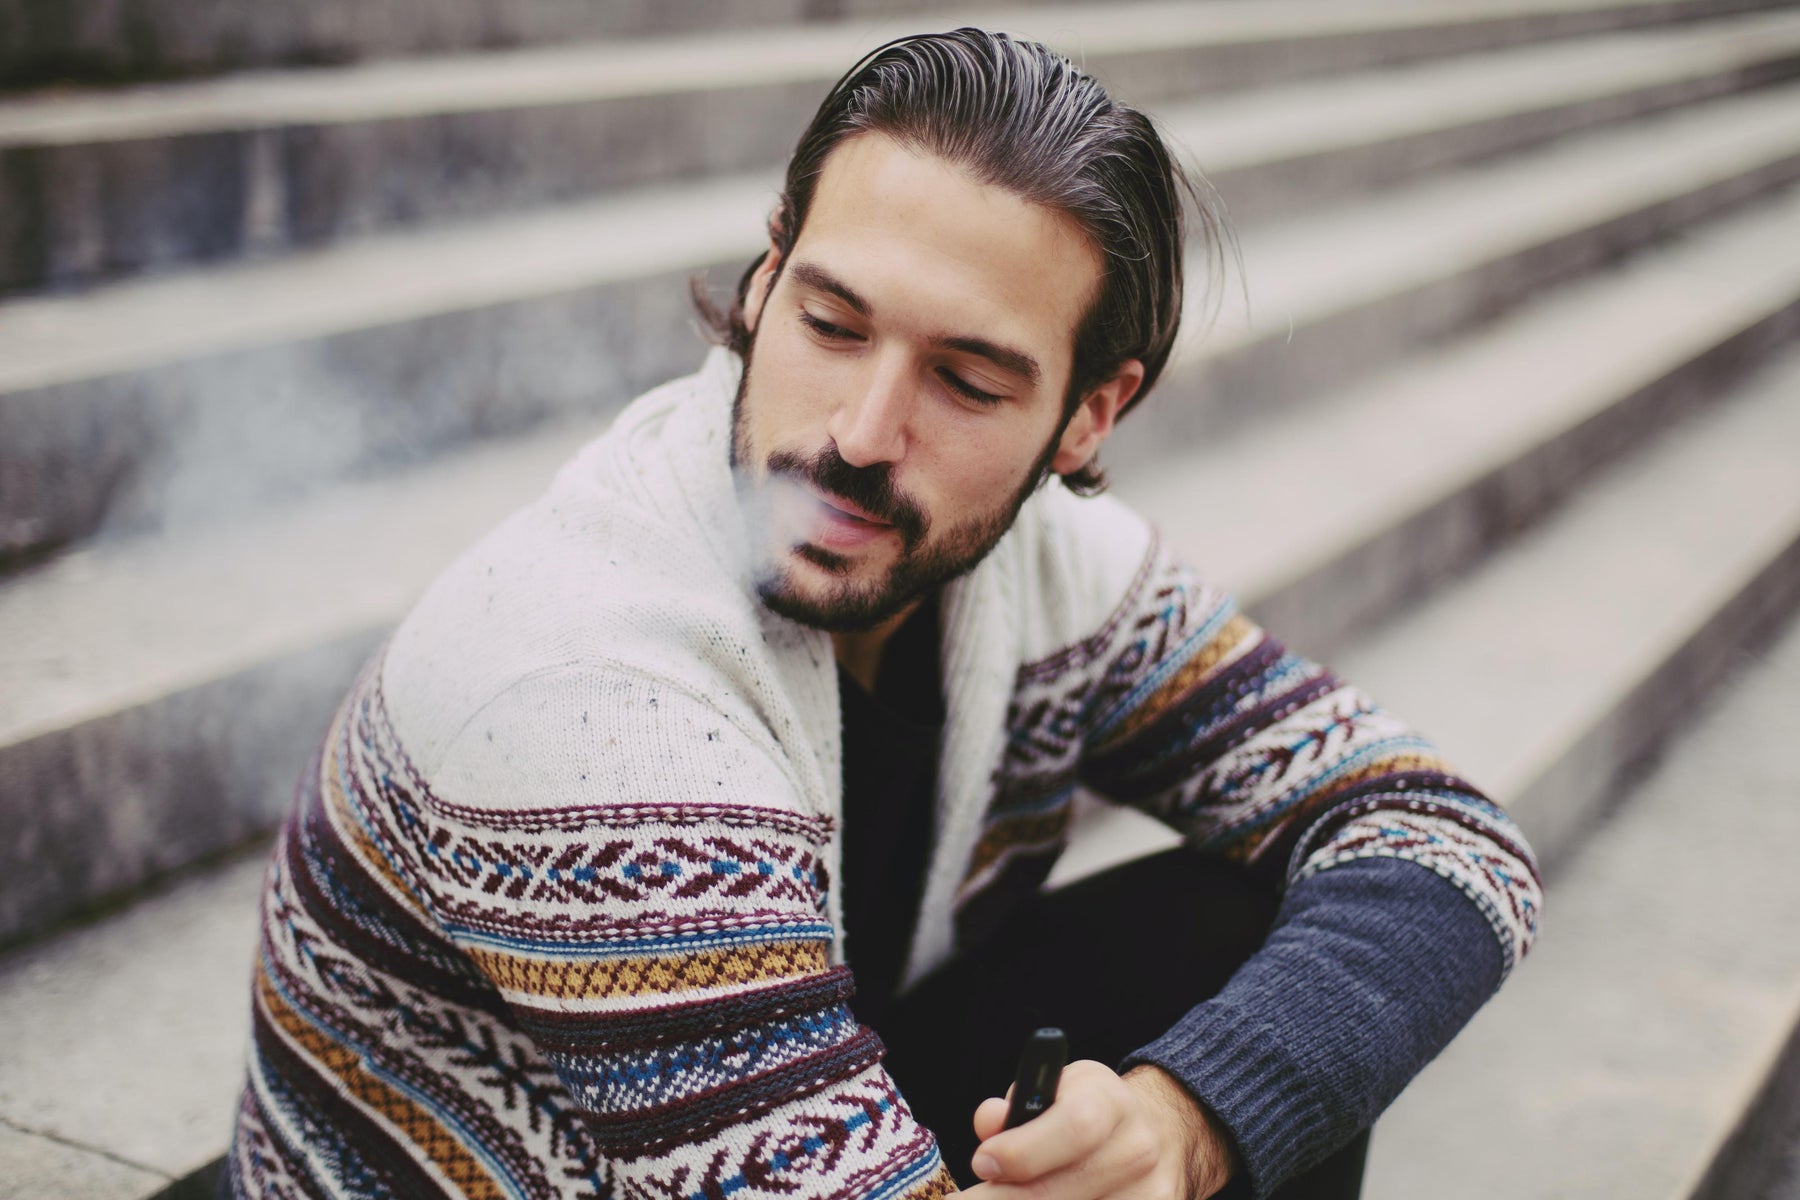 New to Vaping? These Are the Things You Should Know